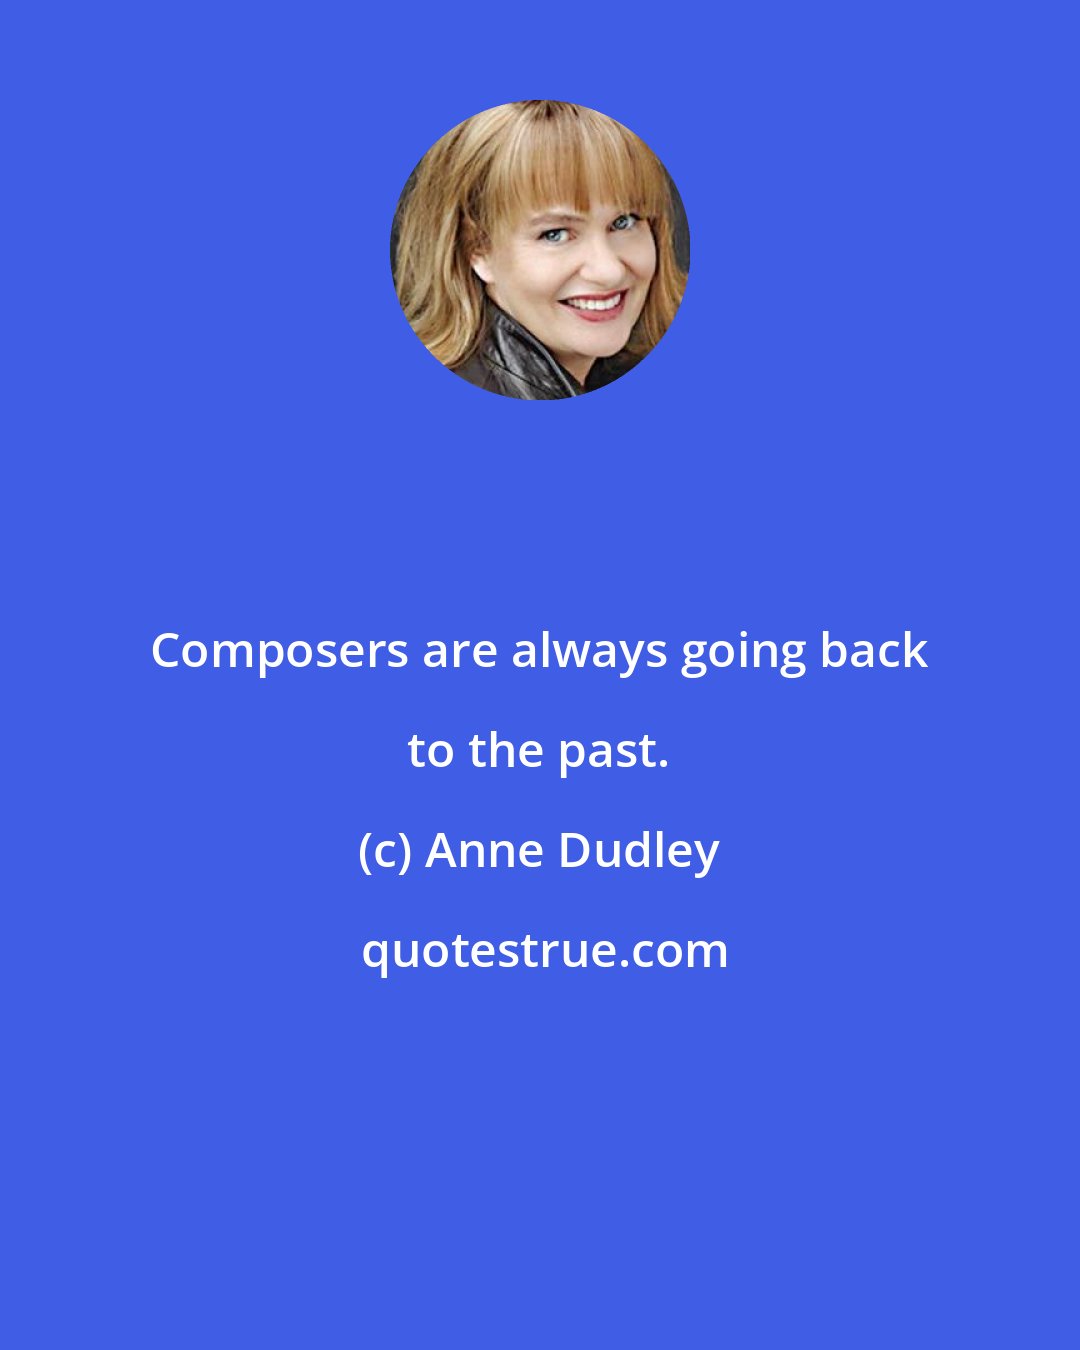 Anne Dudley: Composers are always going back to the past.